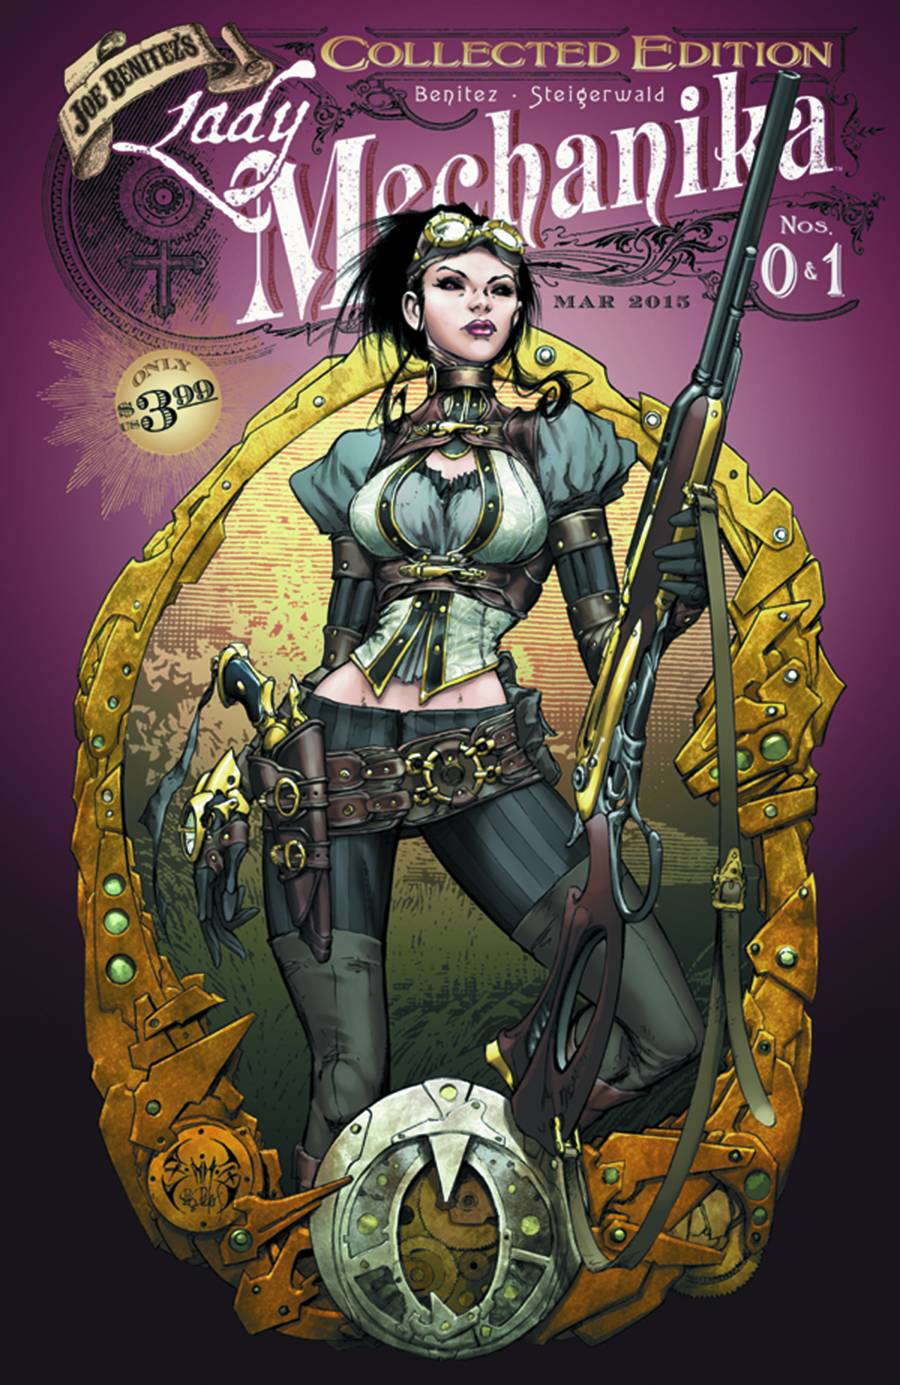 Lady Mechanika #0 & #1 Collected Edition #1